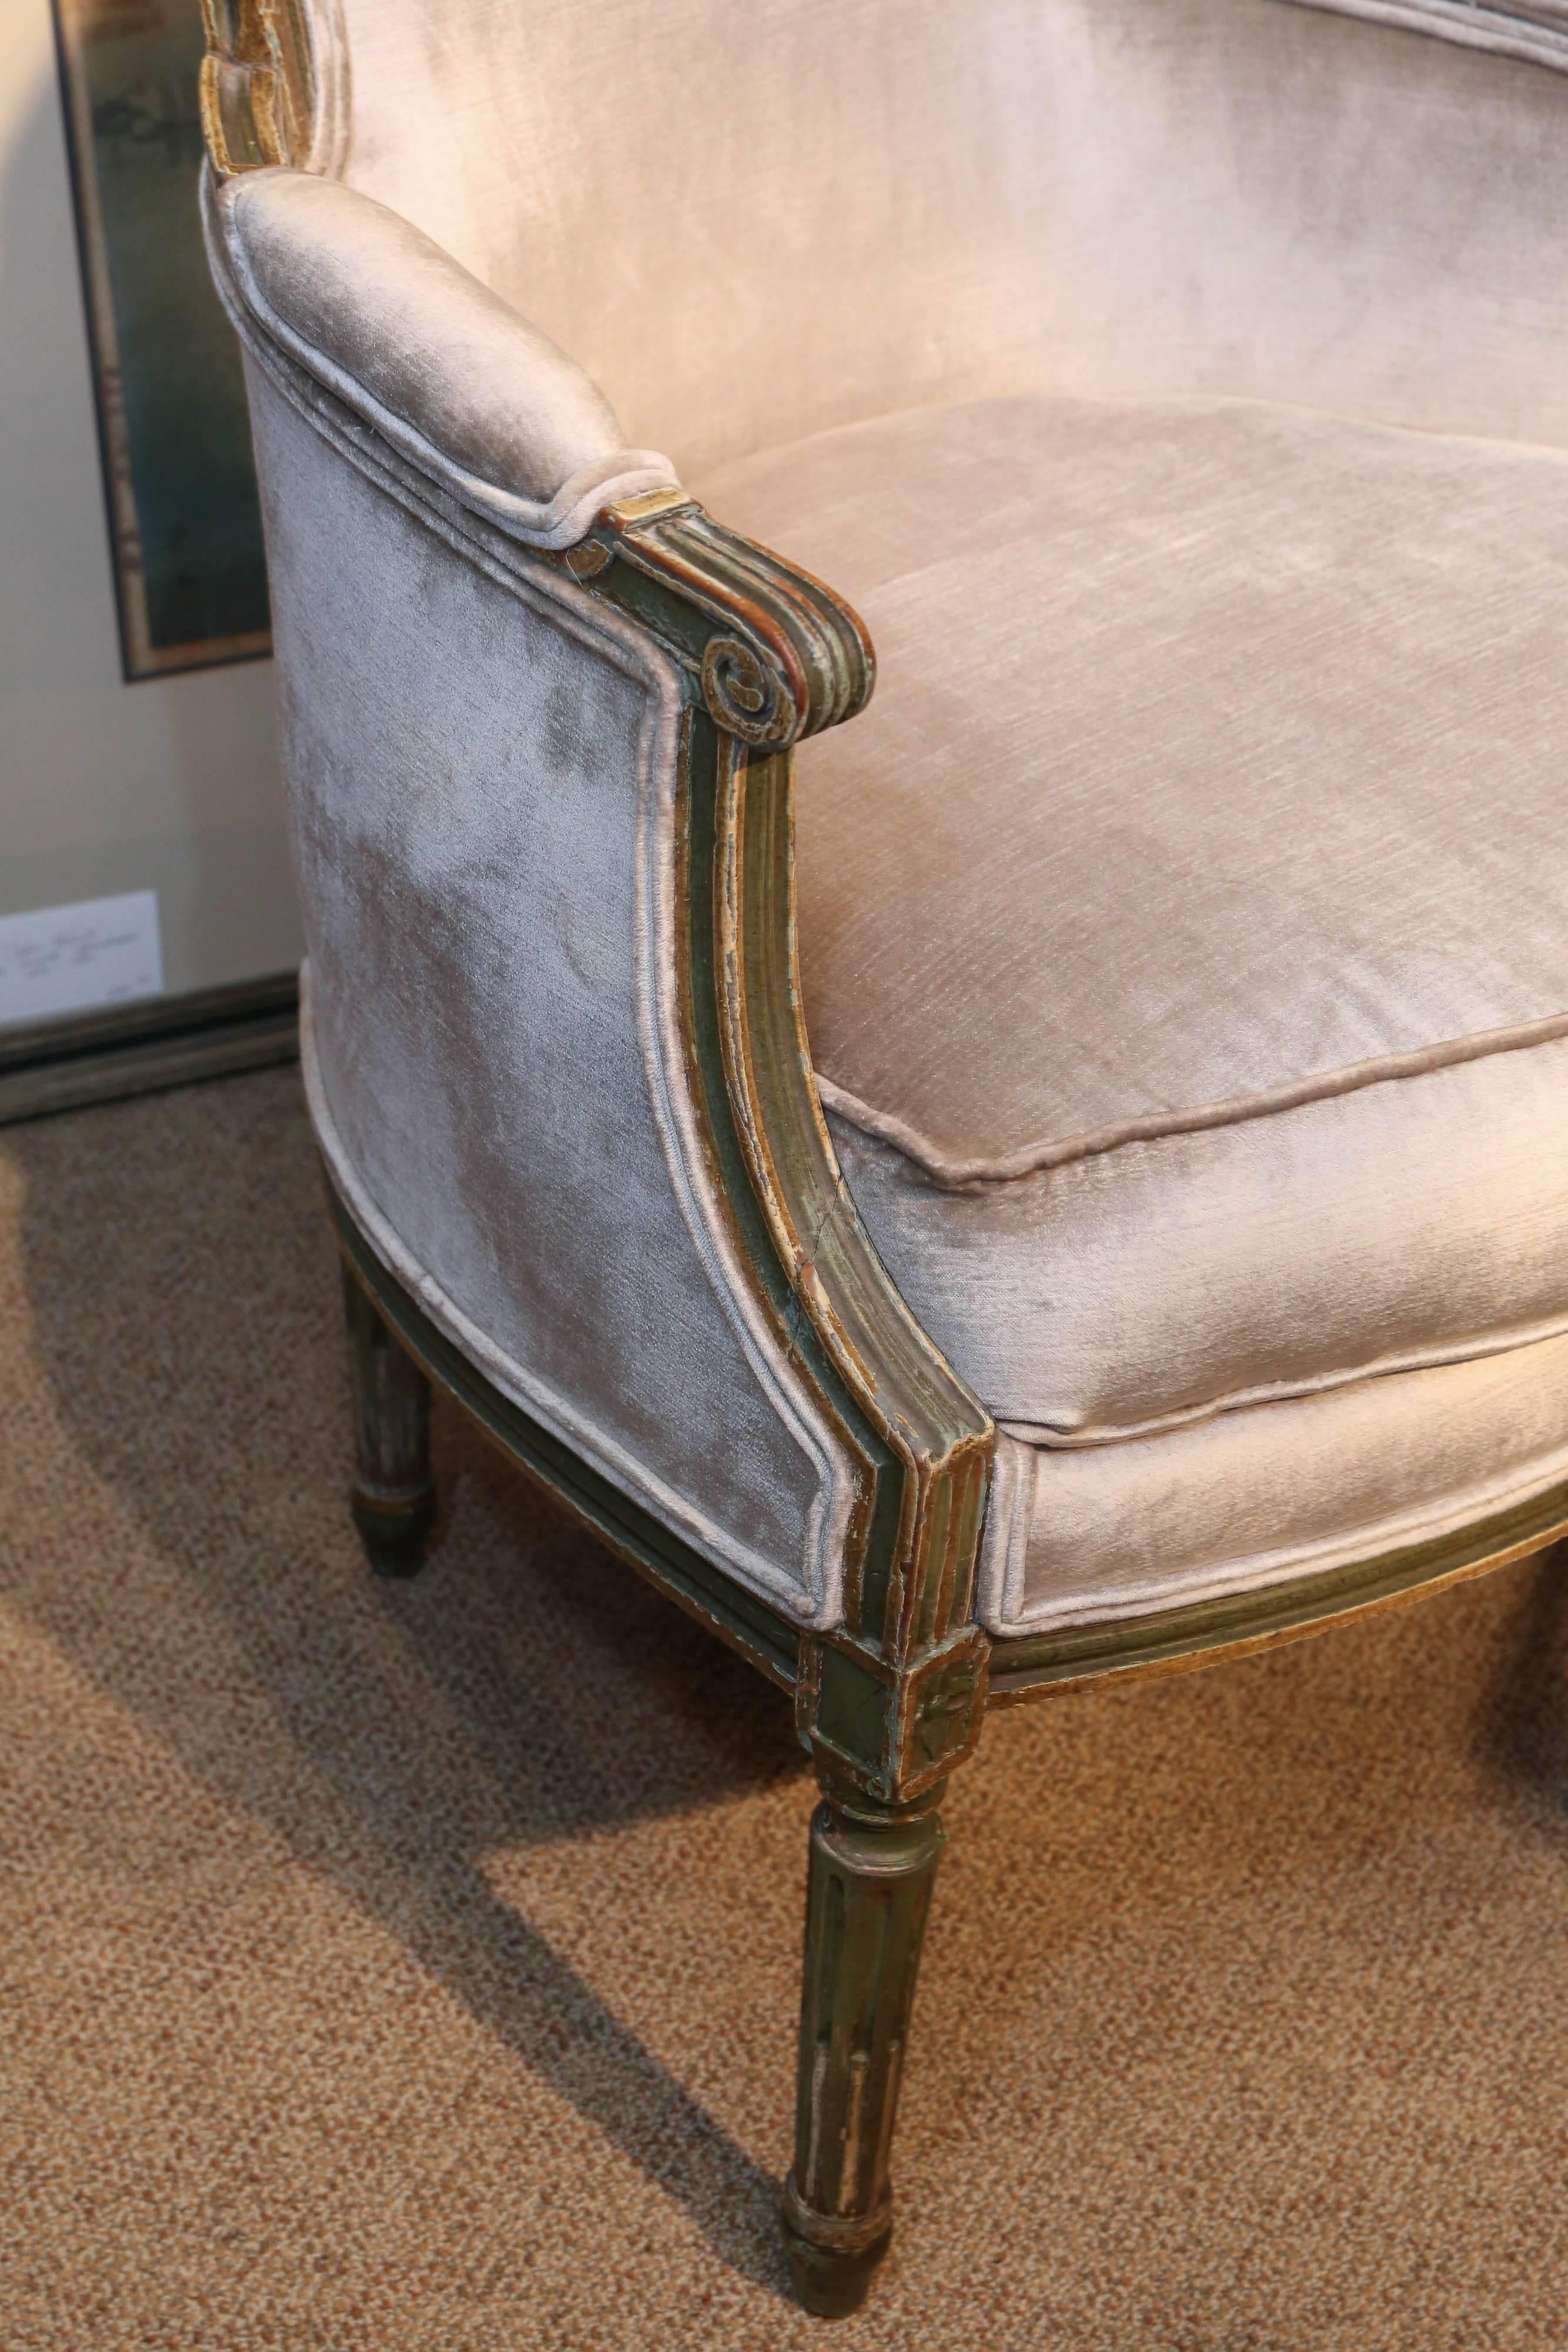 Fine pair of Louis XVI bergere chairs. Parcel paint and gilt finish.
In French green early 19th century.
These have been re upholstered in a fine pale gray silk velvet.